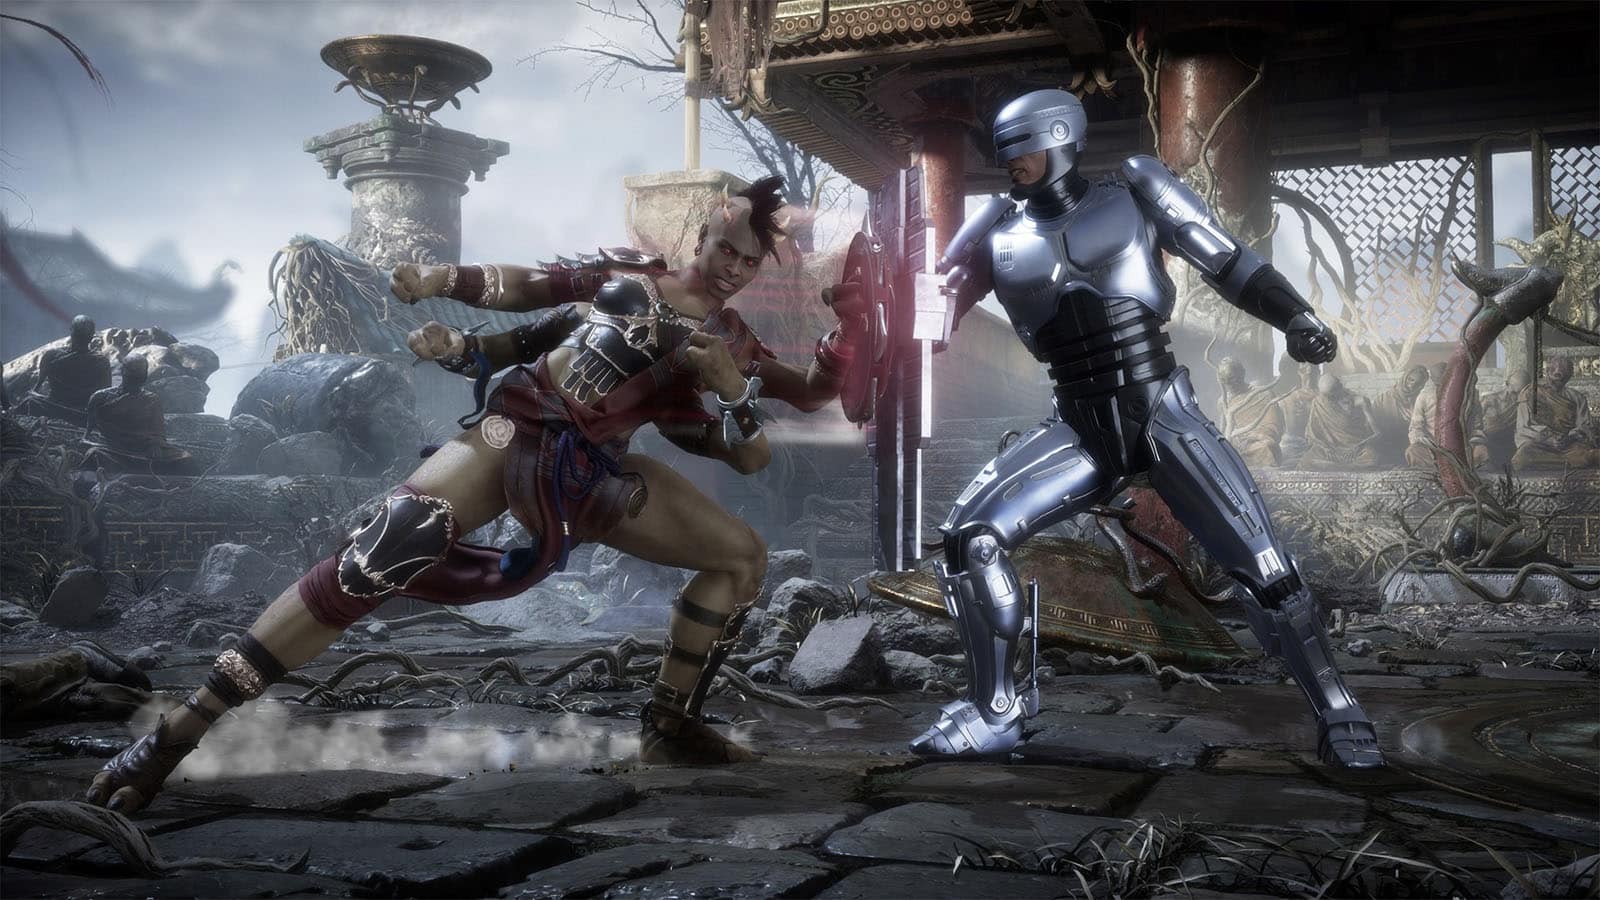 How To Perform The Locked Fatalities For Mortal Kombat 11: Aftermath's New  Kharacters